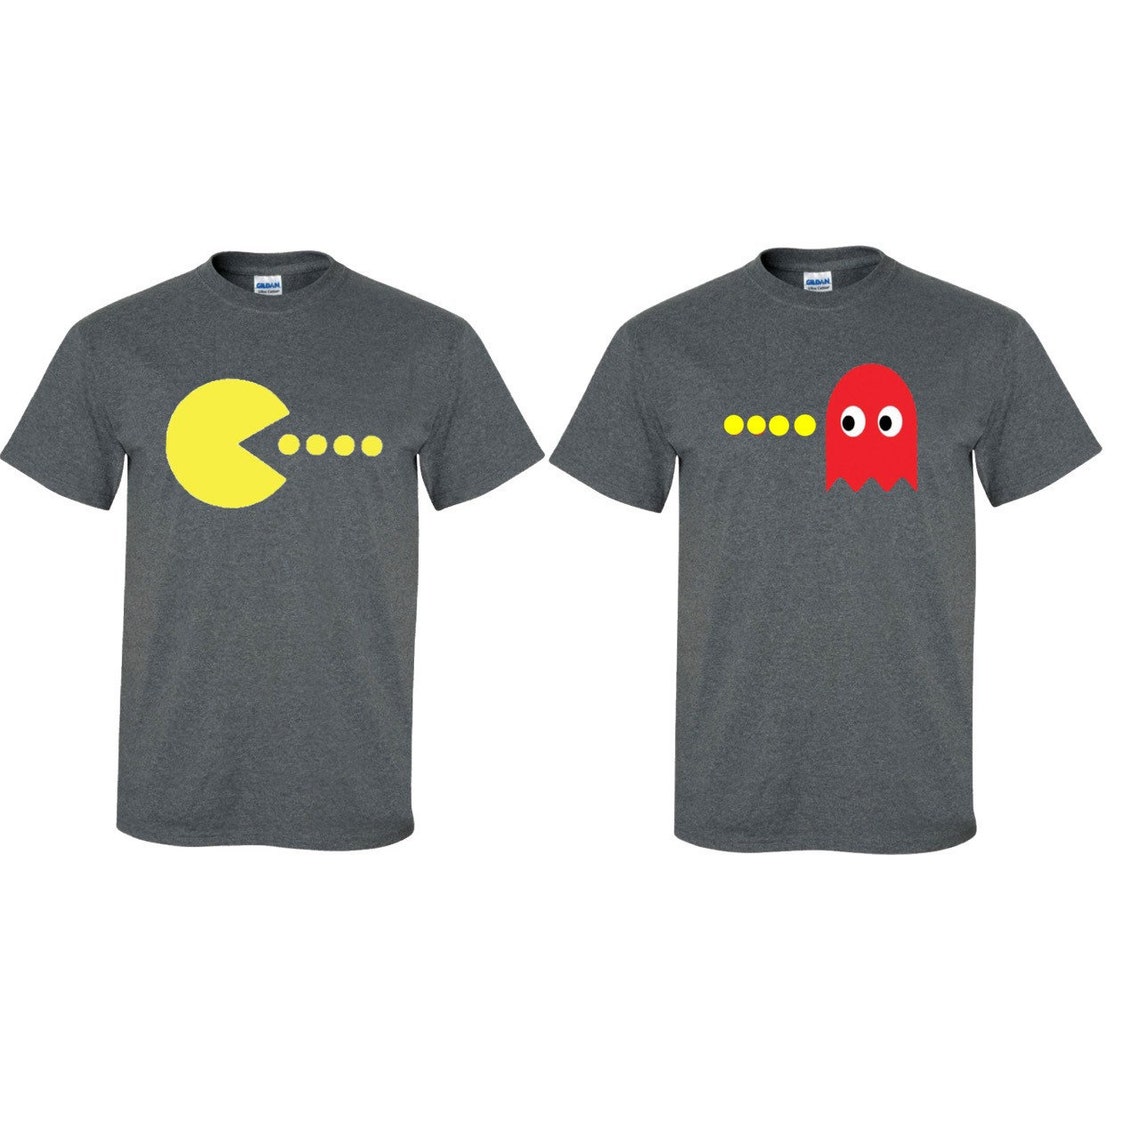 Couples Matching T-Shirts Pac-man & Ghost Classic Video | Etsy